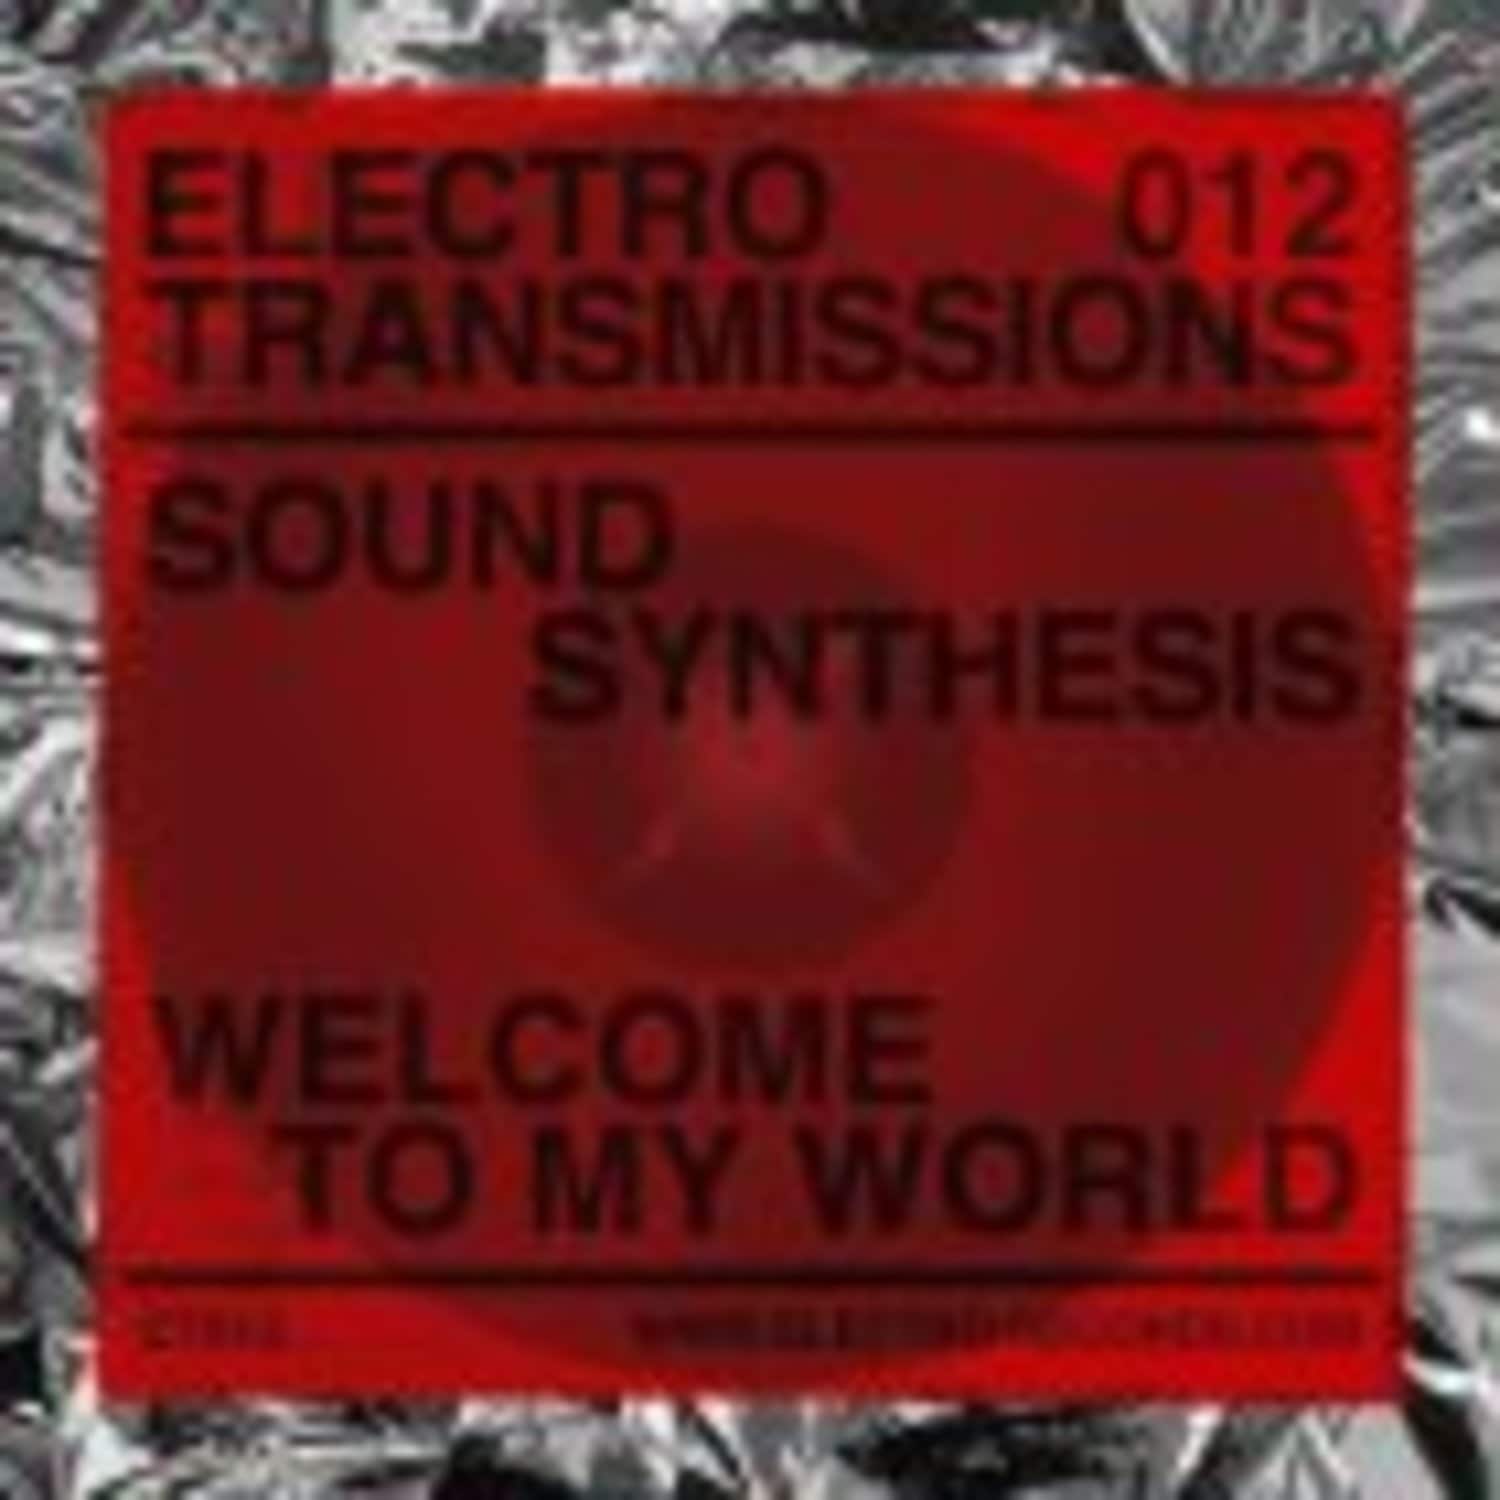 Sound Synthesis - ELECTRO TRANSMISSIONS 012 - WELCOME TO MY WORLD